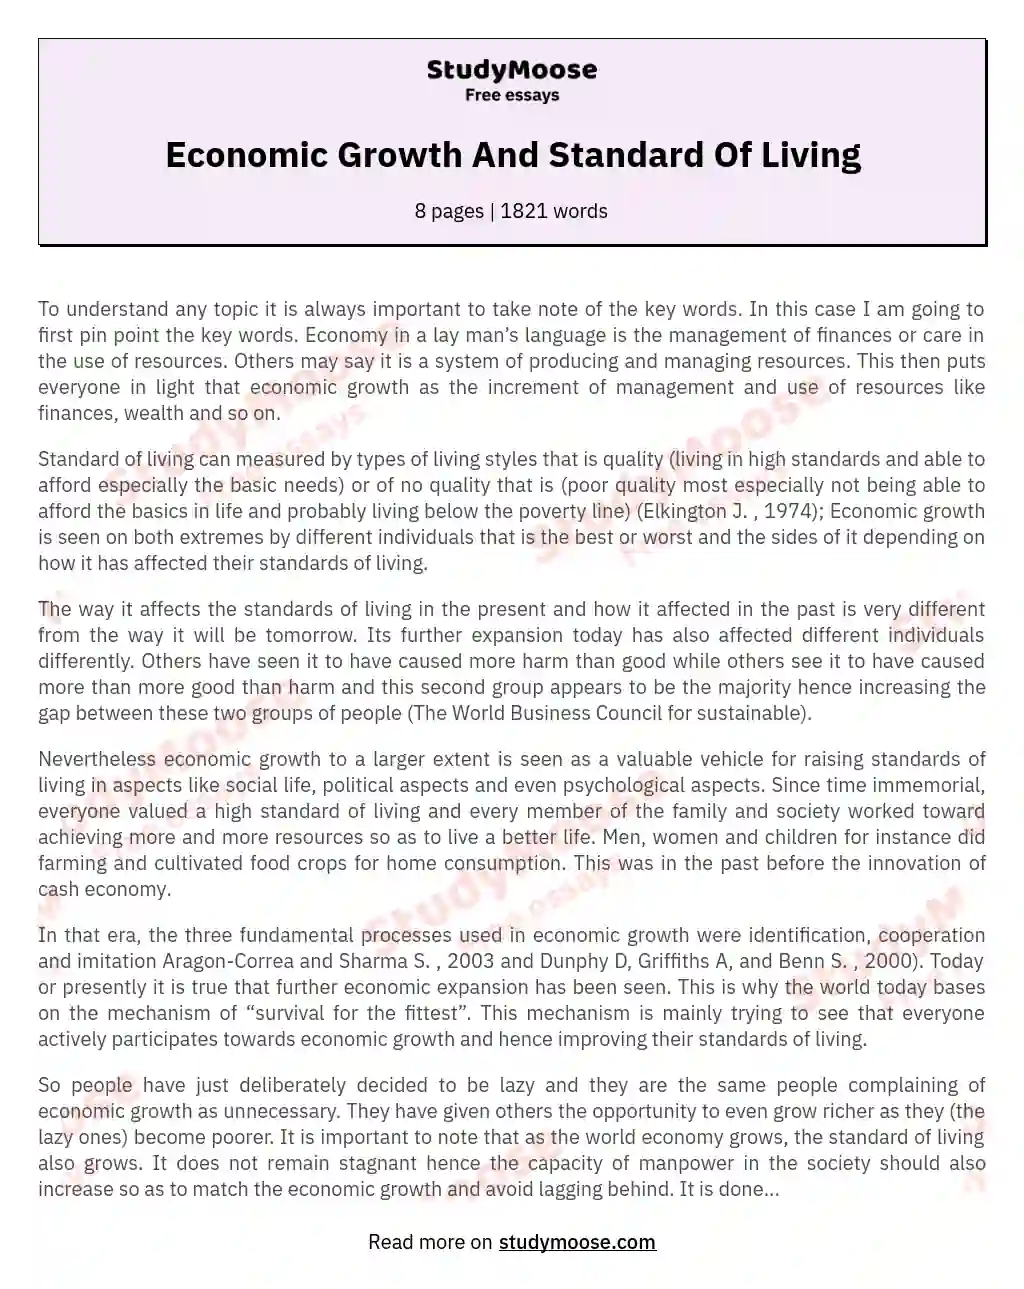 write an essay about economic growth